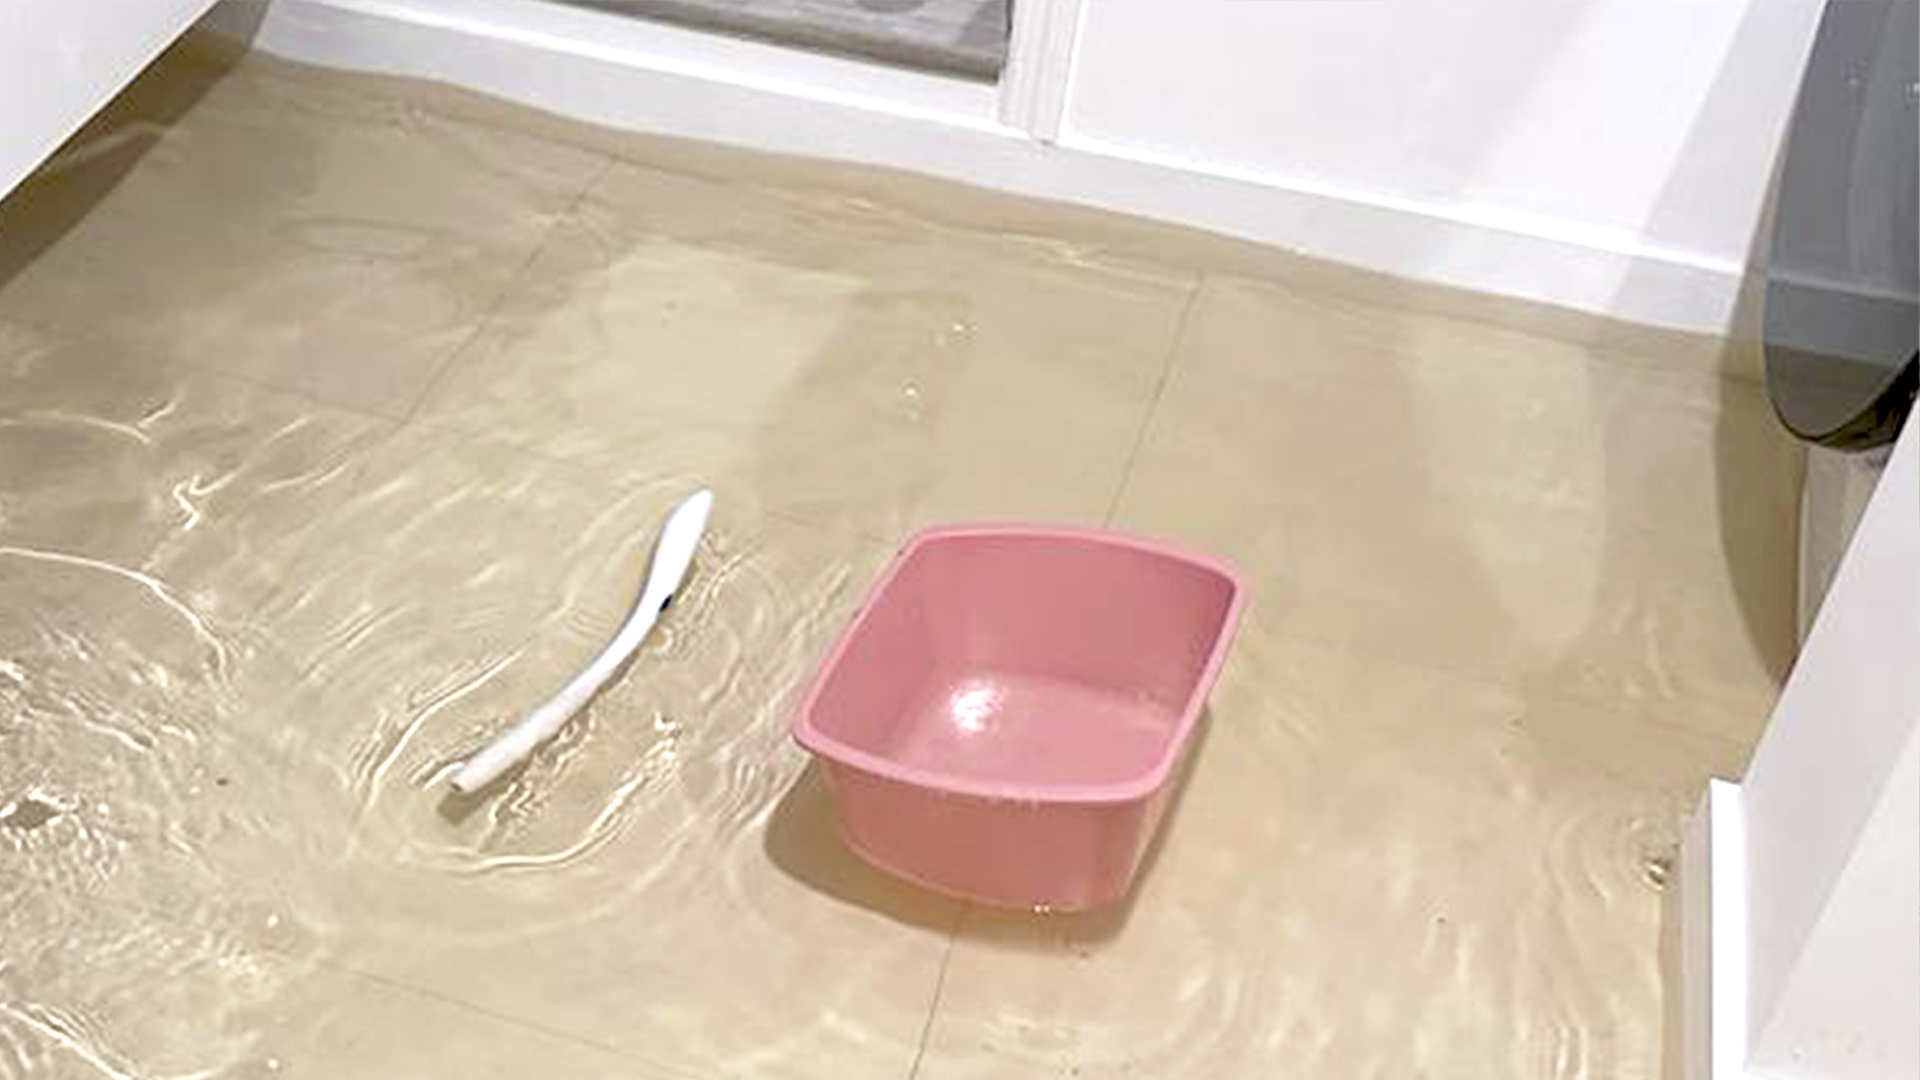 Questions about water damage claims from homeowners